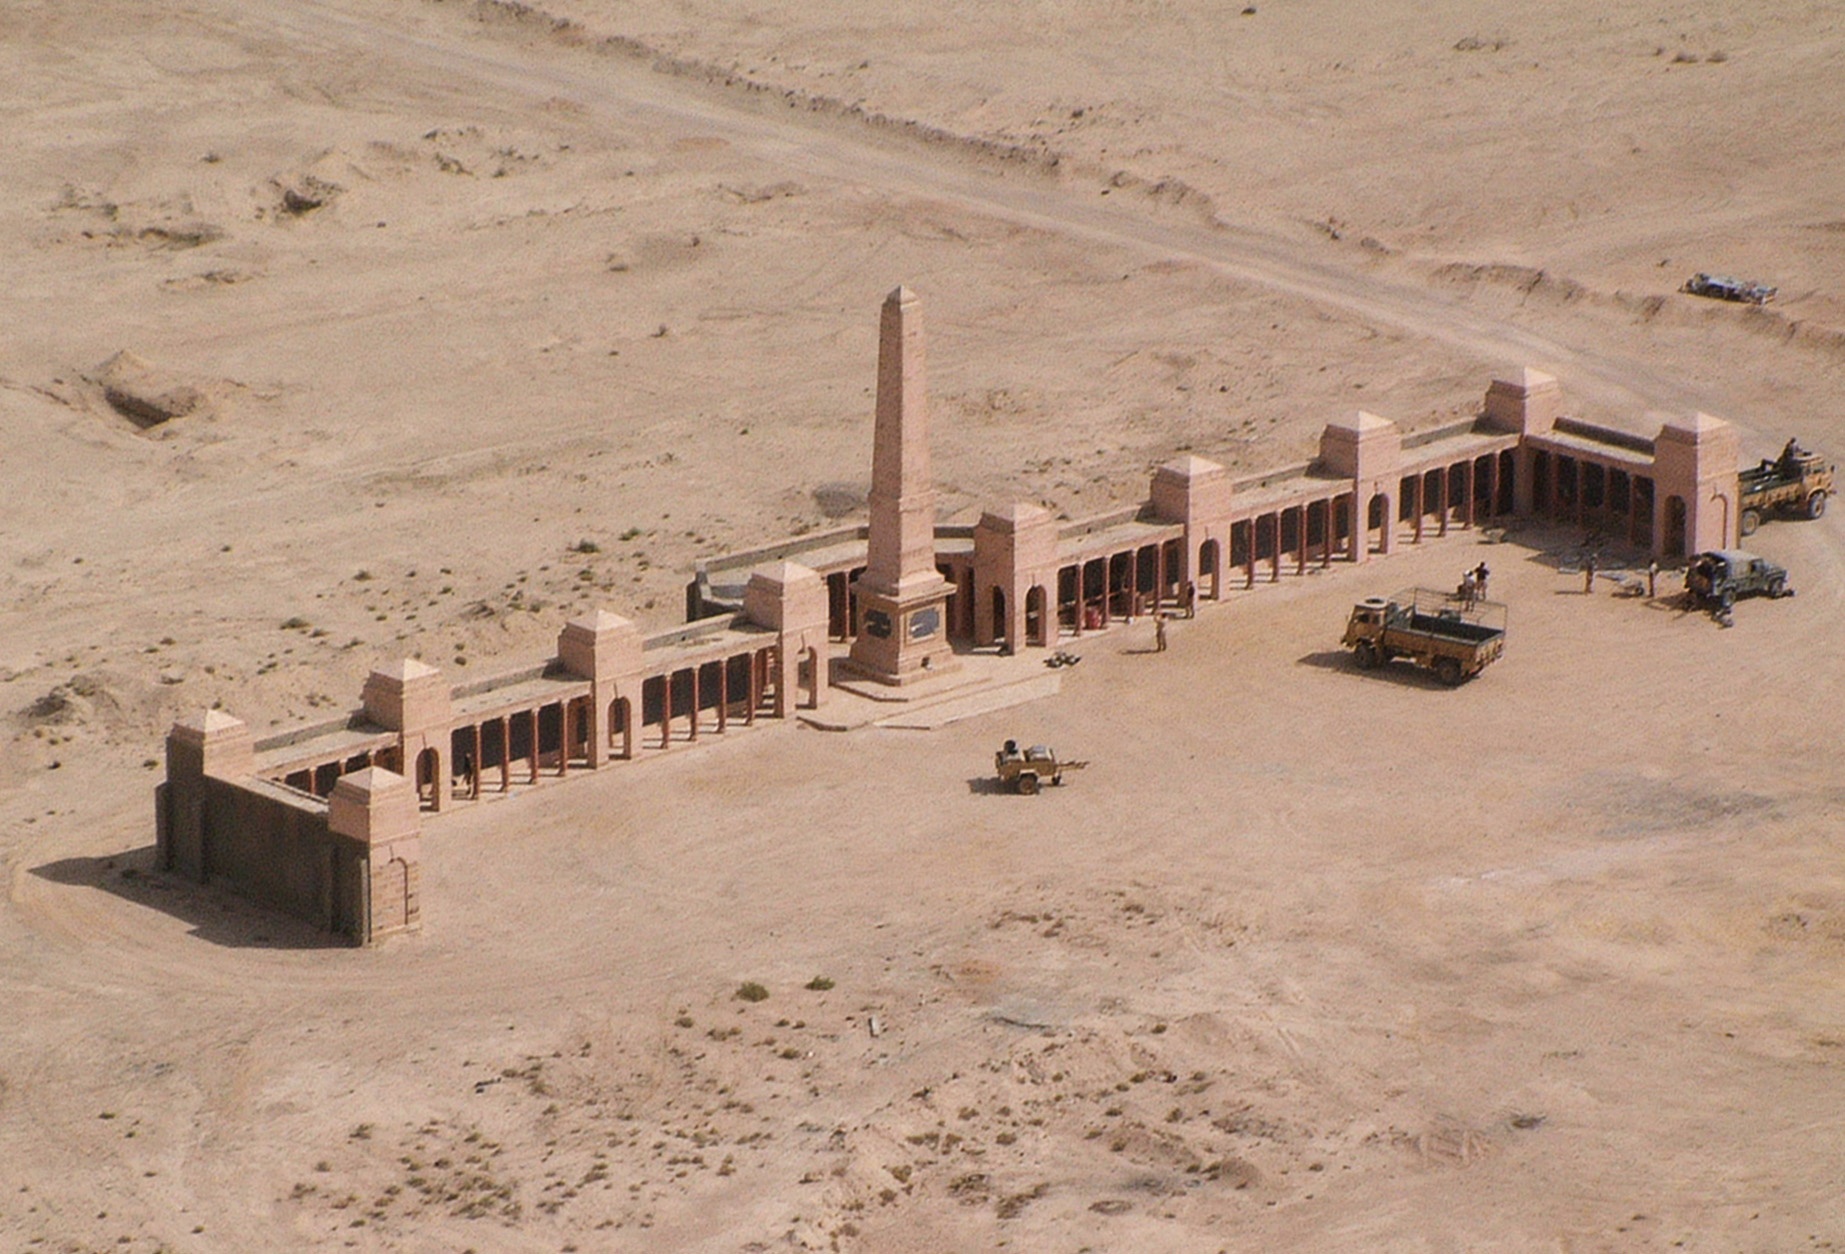 Aerial photograph of the Basra Memorial in the middle of the desert